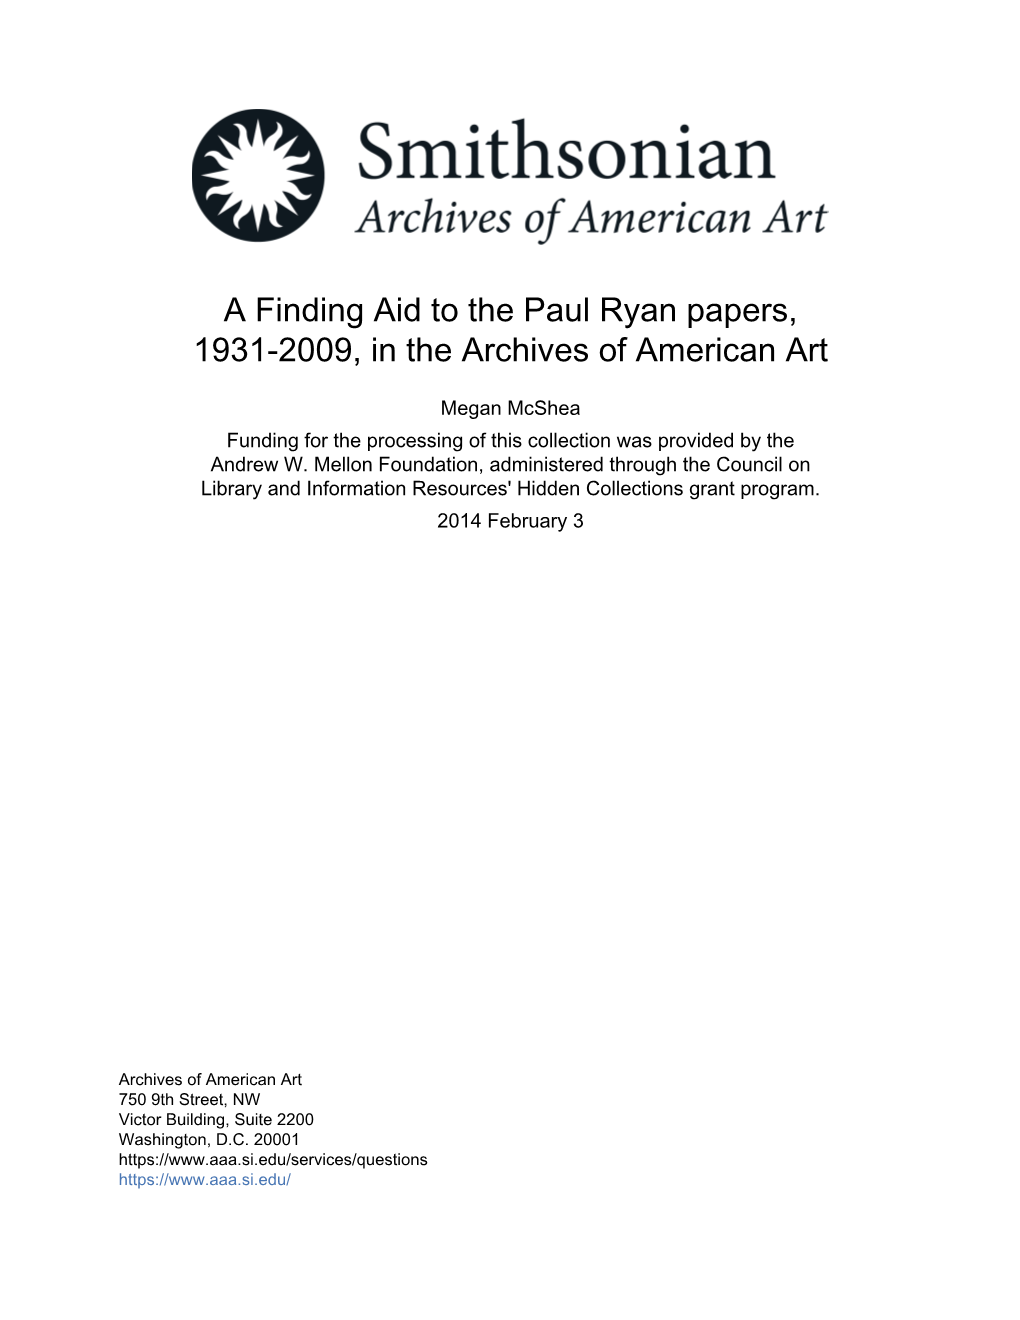 A Finding Aid to the Paul Ryan Papers, 1931-2009, in the Archives of American Art